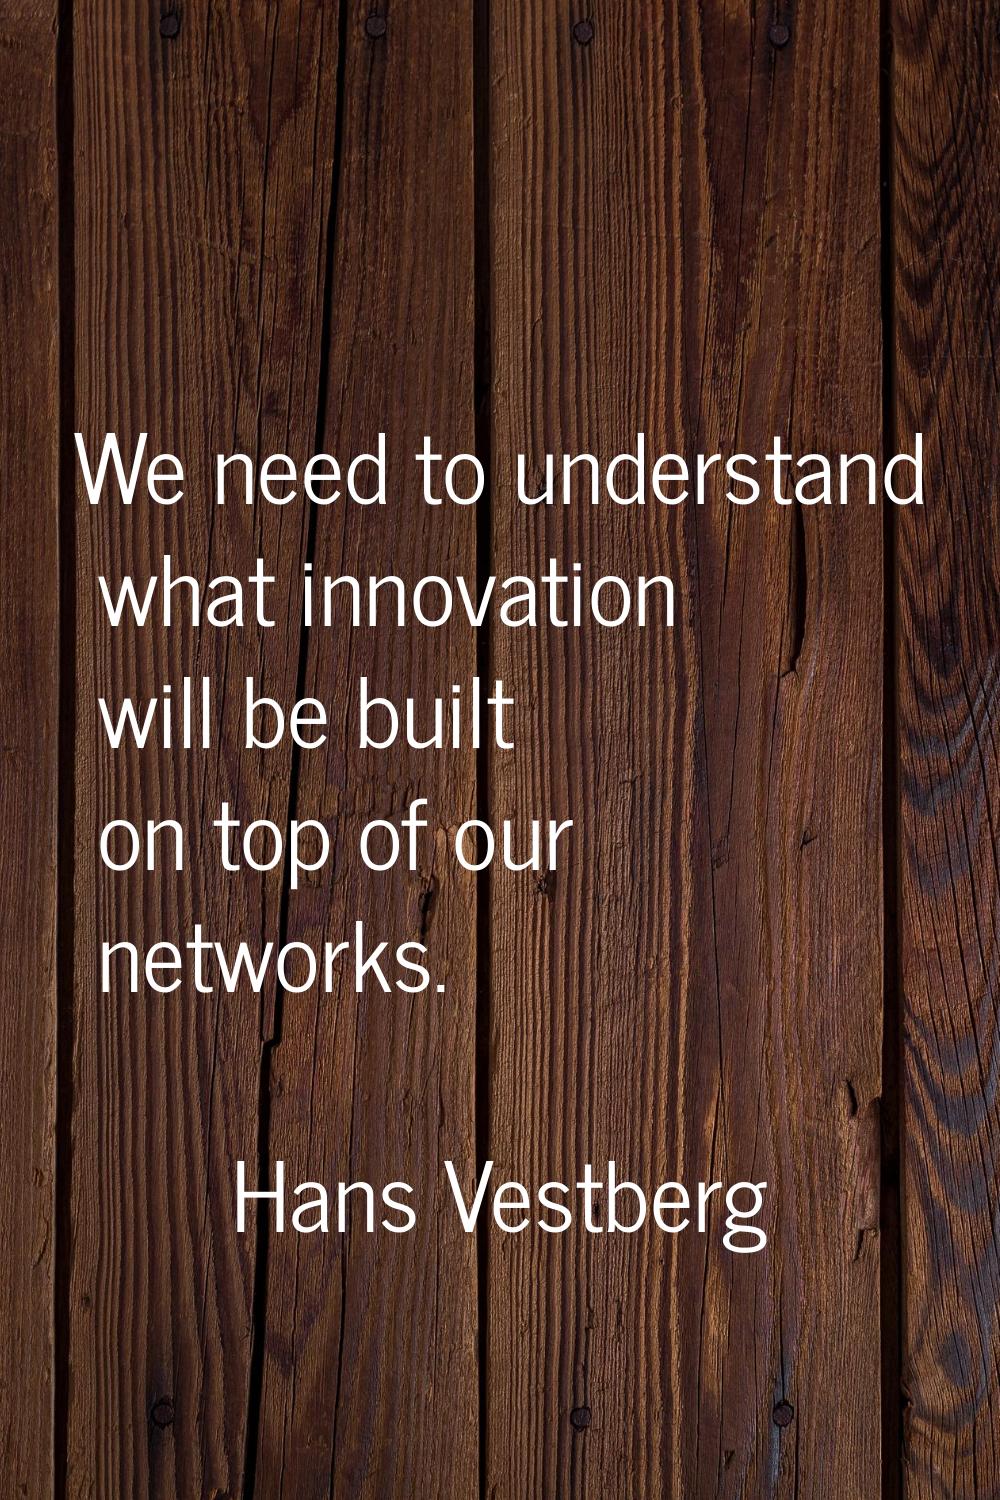 We need to understand what innovation will be built on top of our networks.